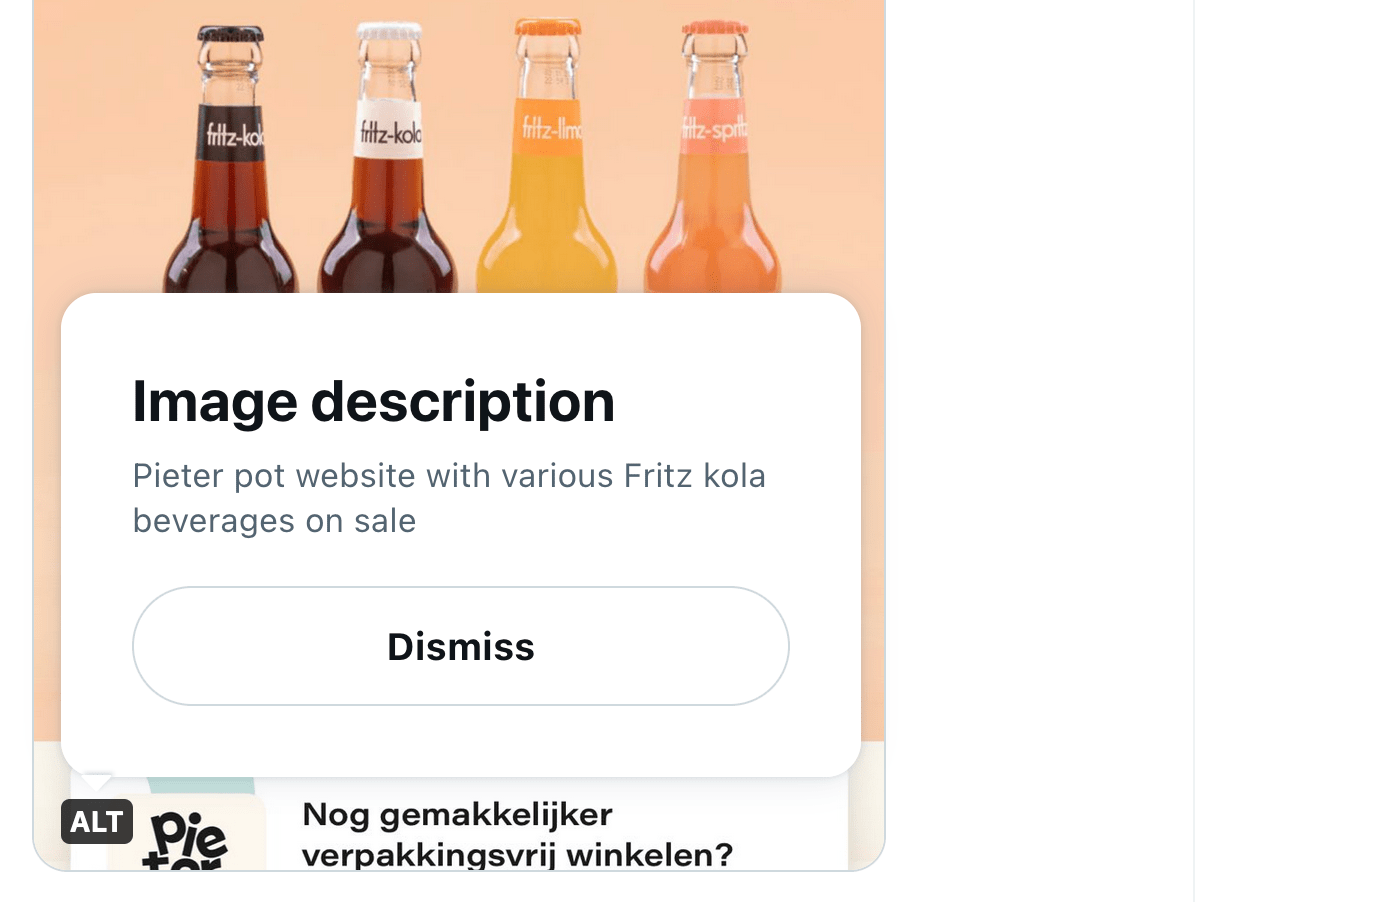 image with bottles of fritz kola on Twitter, in the left bottom corner is an ALT badge from which a popover is expanded that says Image Description, describes the bottles and then has a large Dismiss button